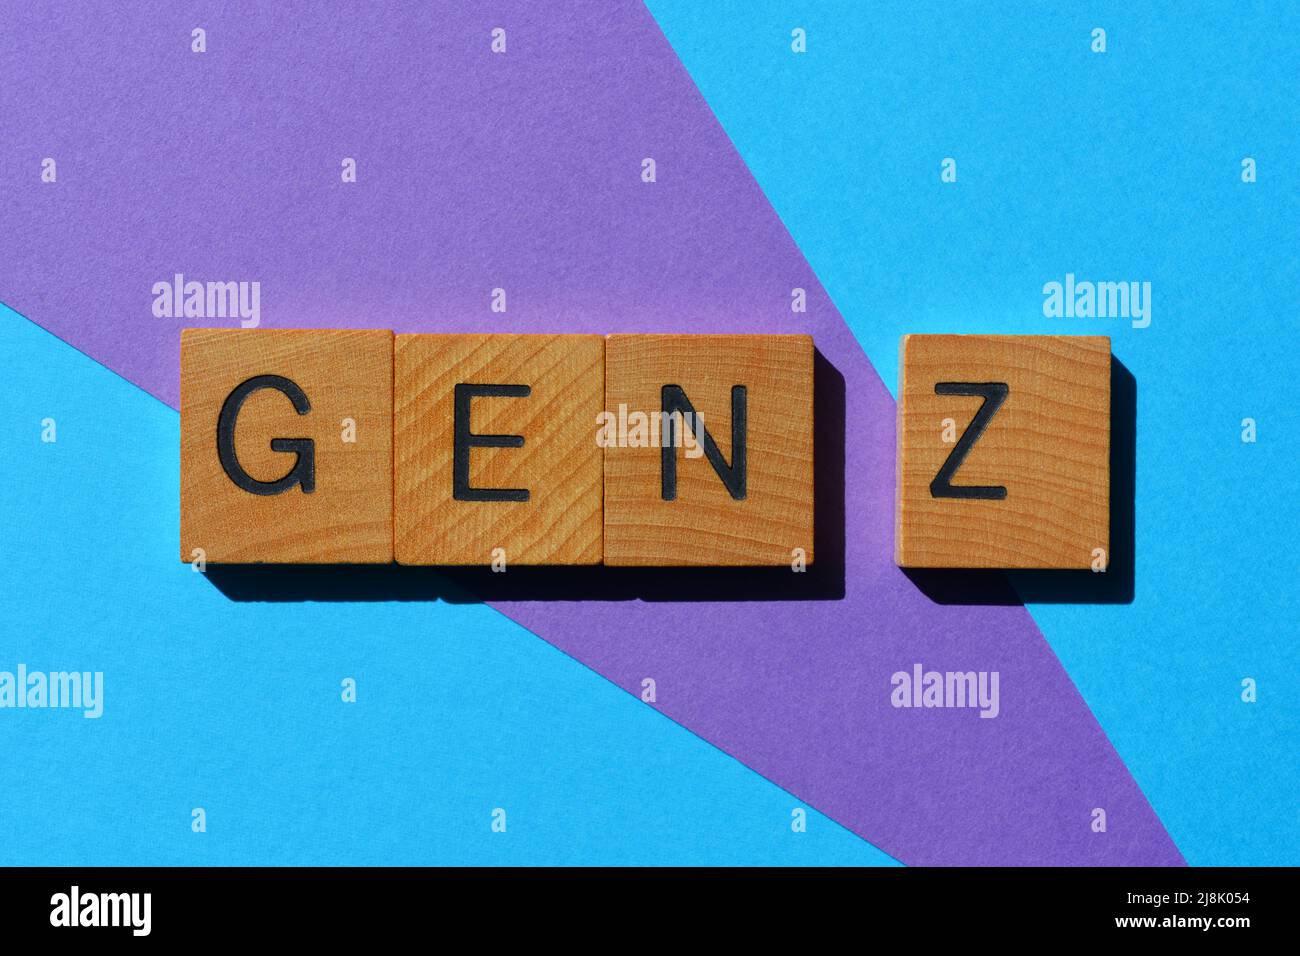 Gen Z, abbreviation for Generation Z people born between 1995 to 2010, word in wooden alphabet letters isolated on background Stock Photo